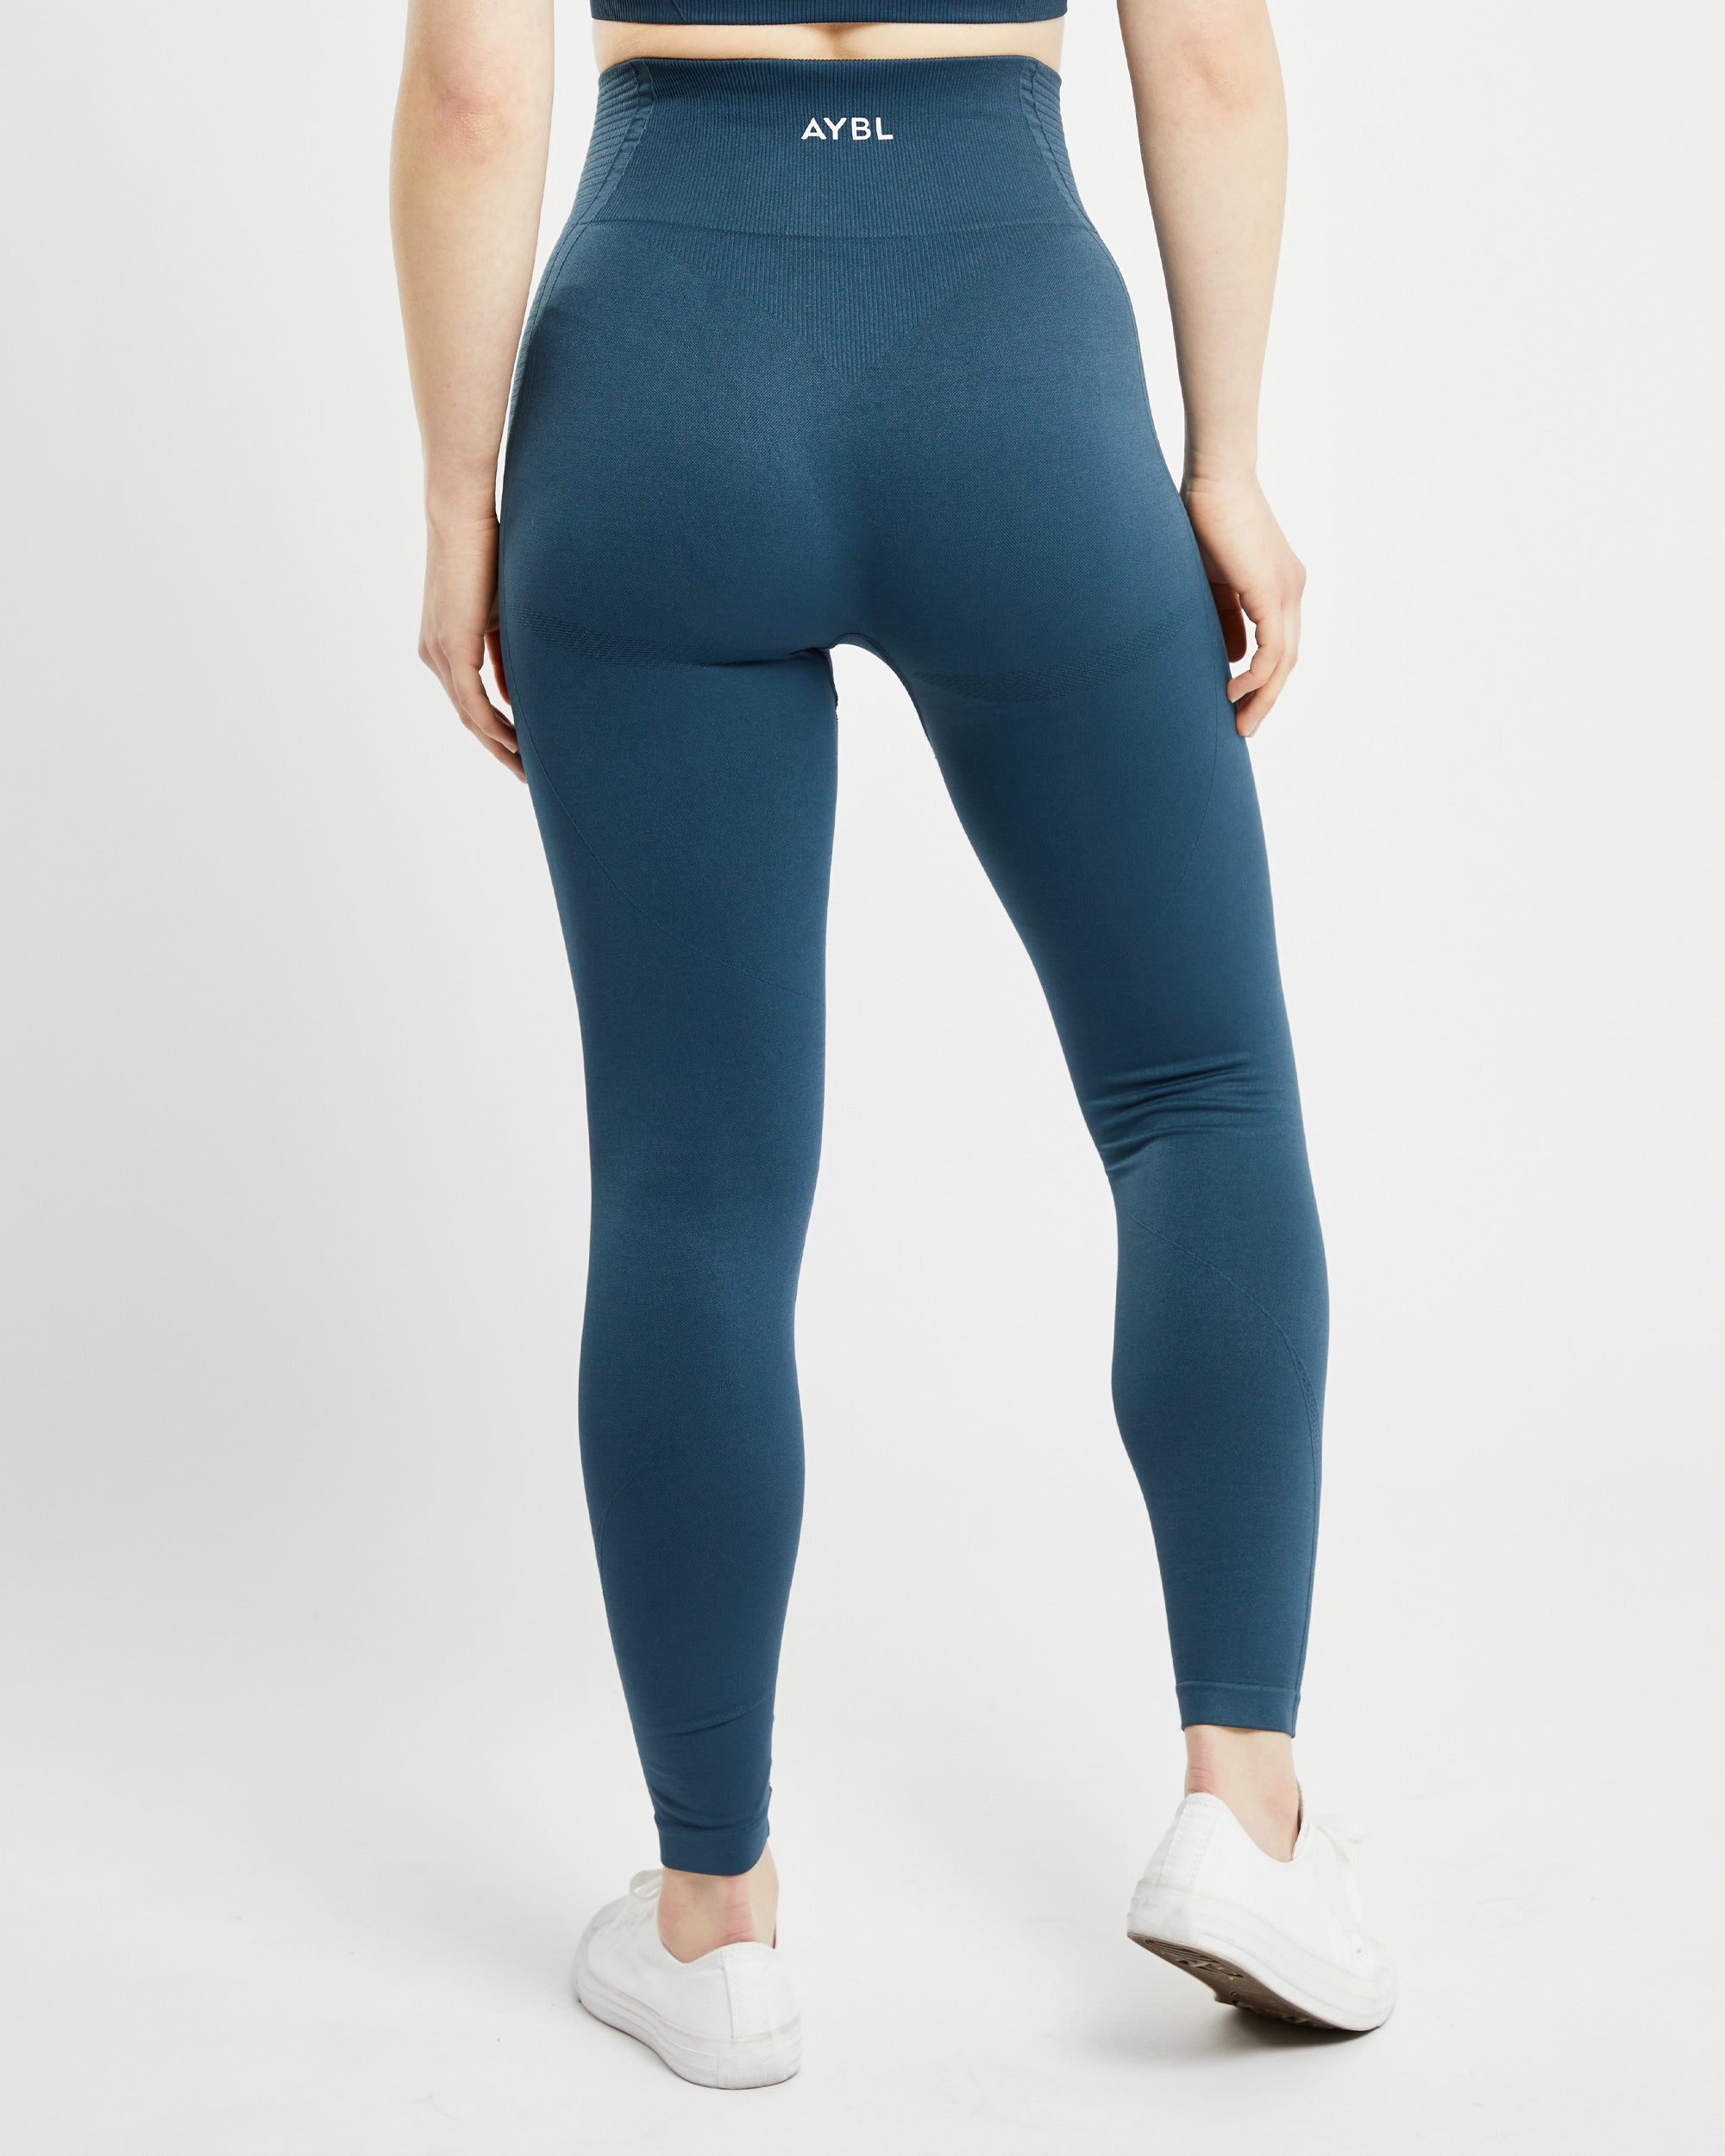 AYBL Seamless Leggings- EVOLVE SPECKLE Blue Size M - $26 (48% Off Retail) -  From Cinthia